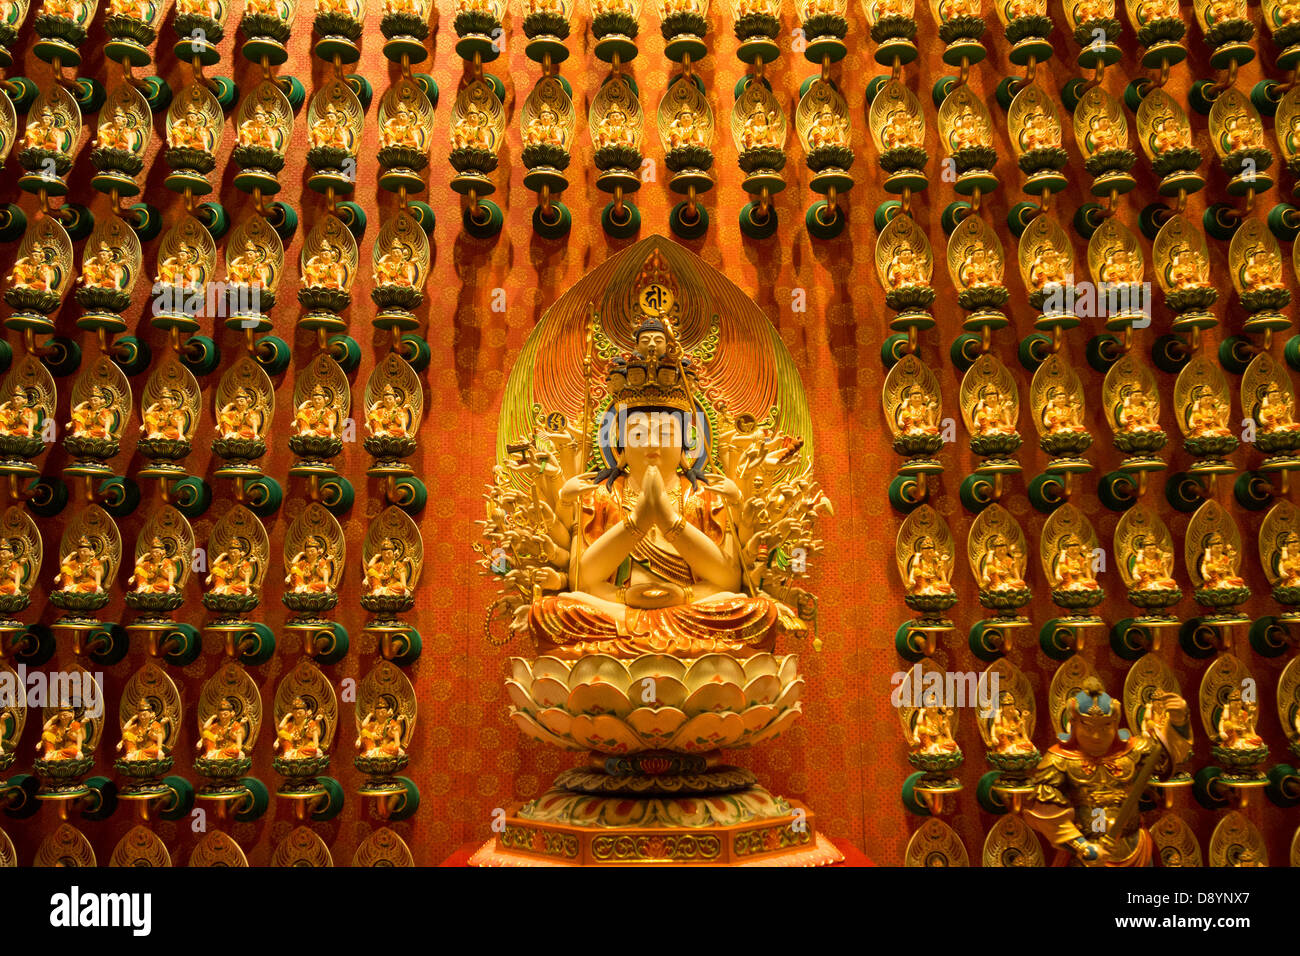 interior fragment of Buddha Tooth Relic Temple located in Singapore's Chinatown. This temple is popular tourist attraction. Stock Photo